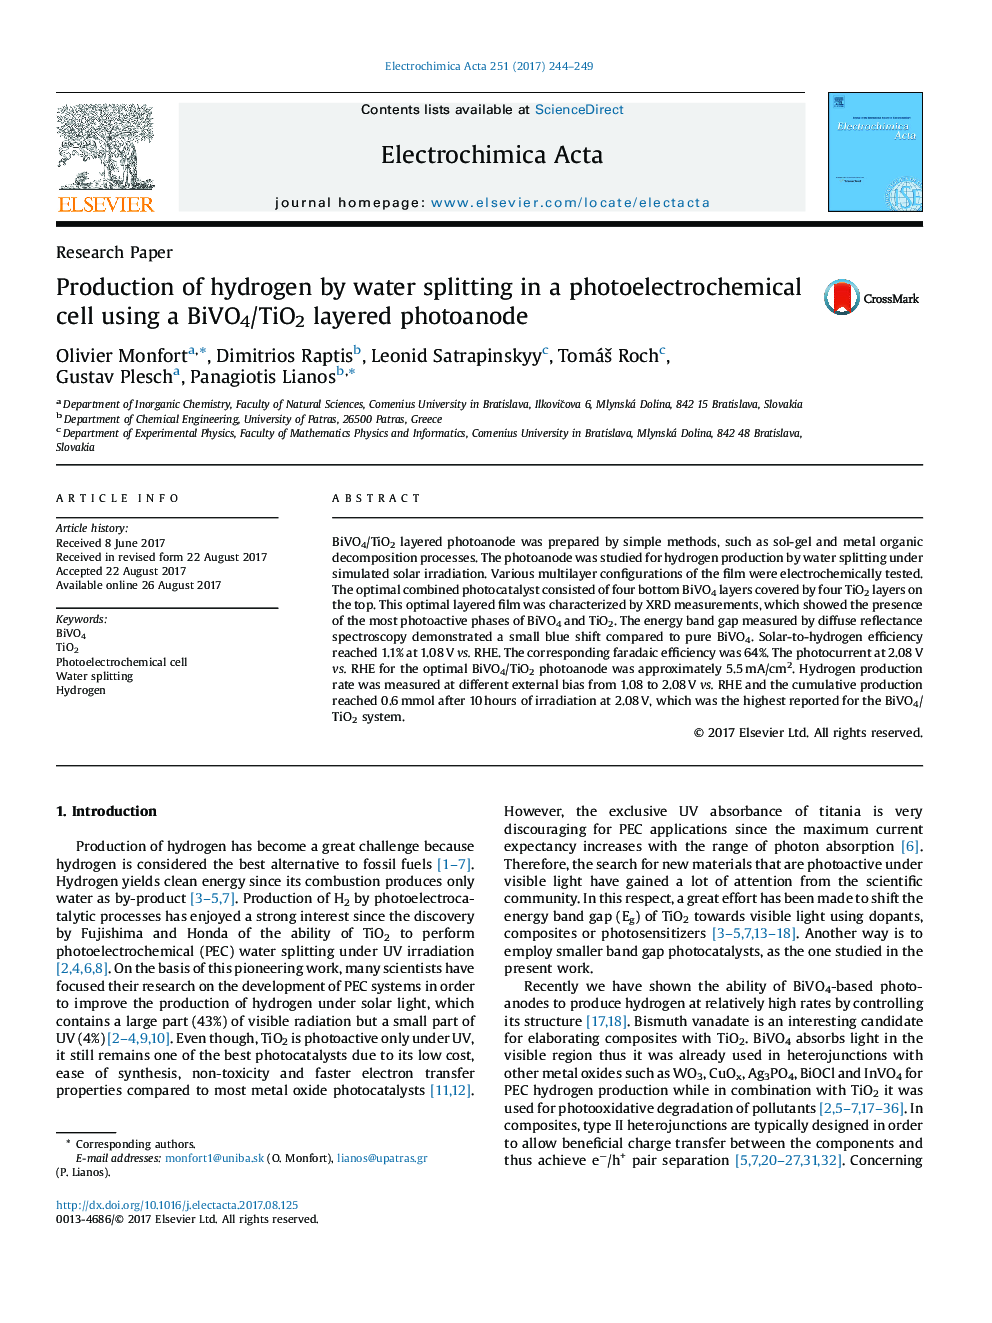 Production of hydrogen by water splitting in a photoelectrochemical cell using a BiVO4/TiO2 layered photoanode